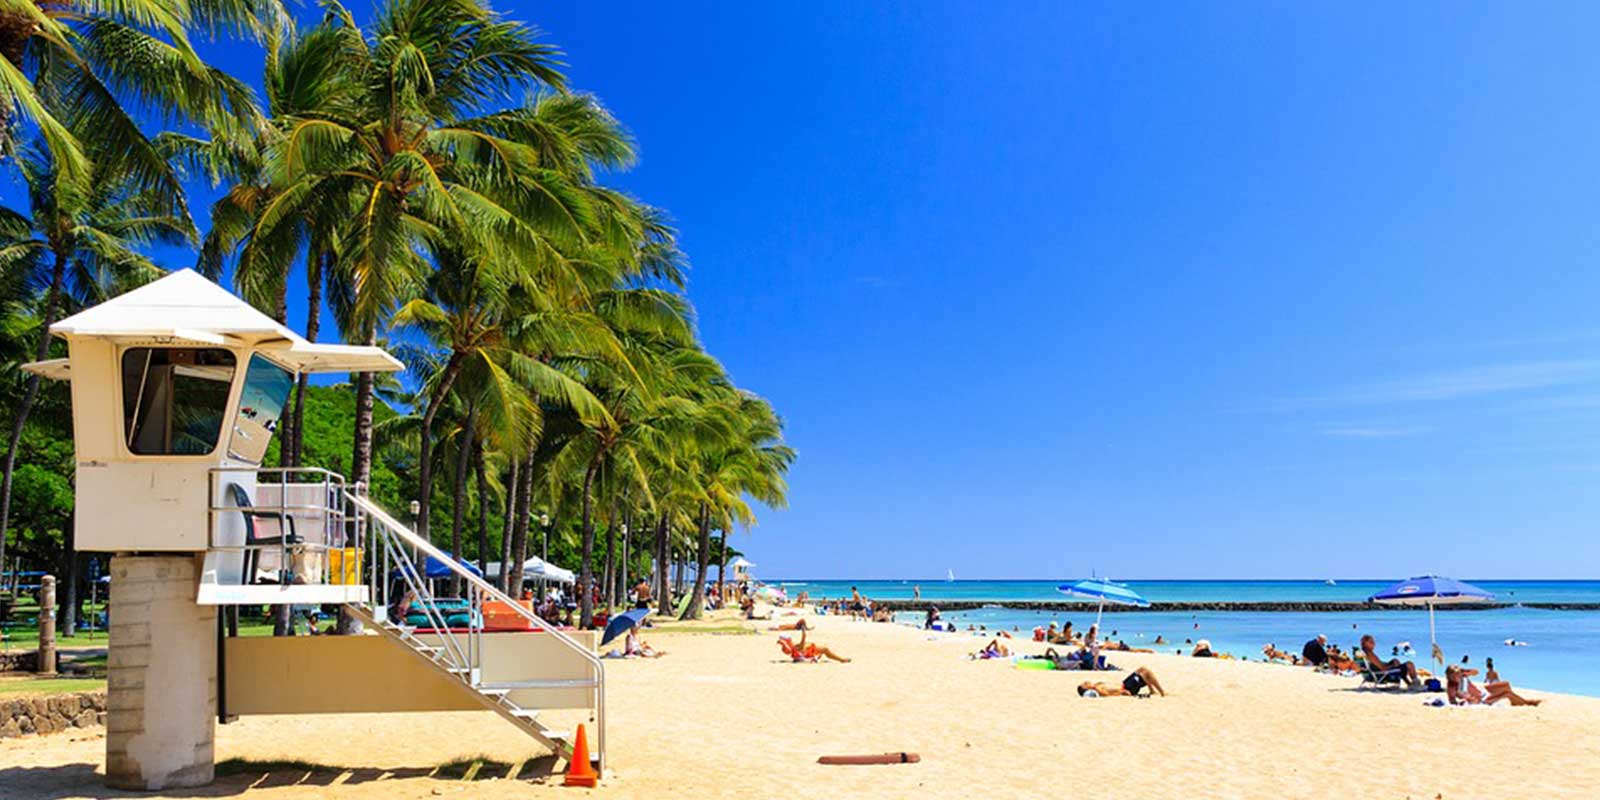 Hawaii 1st US State to Ban Sunscreens Containing chemicals oxybenzone and octinoxate